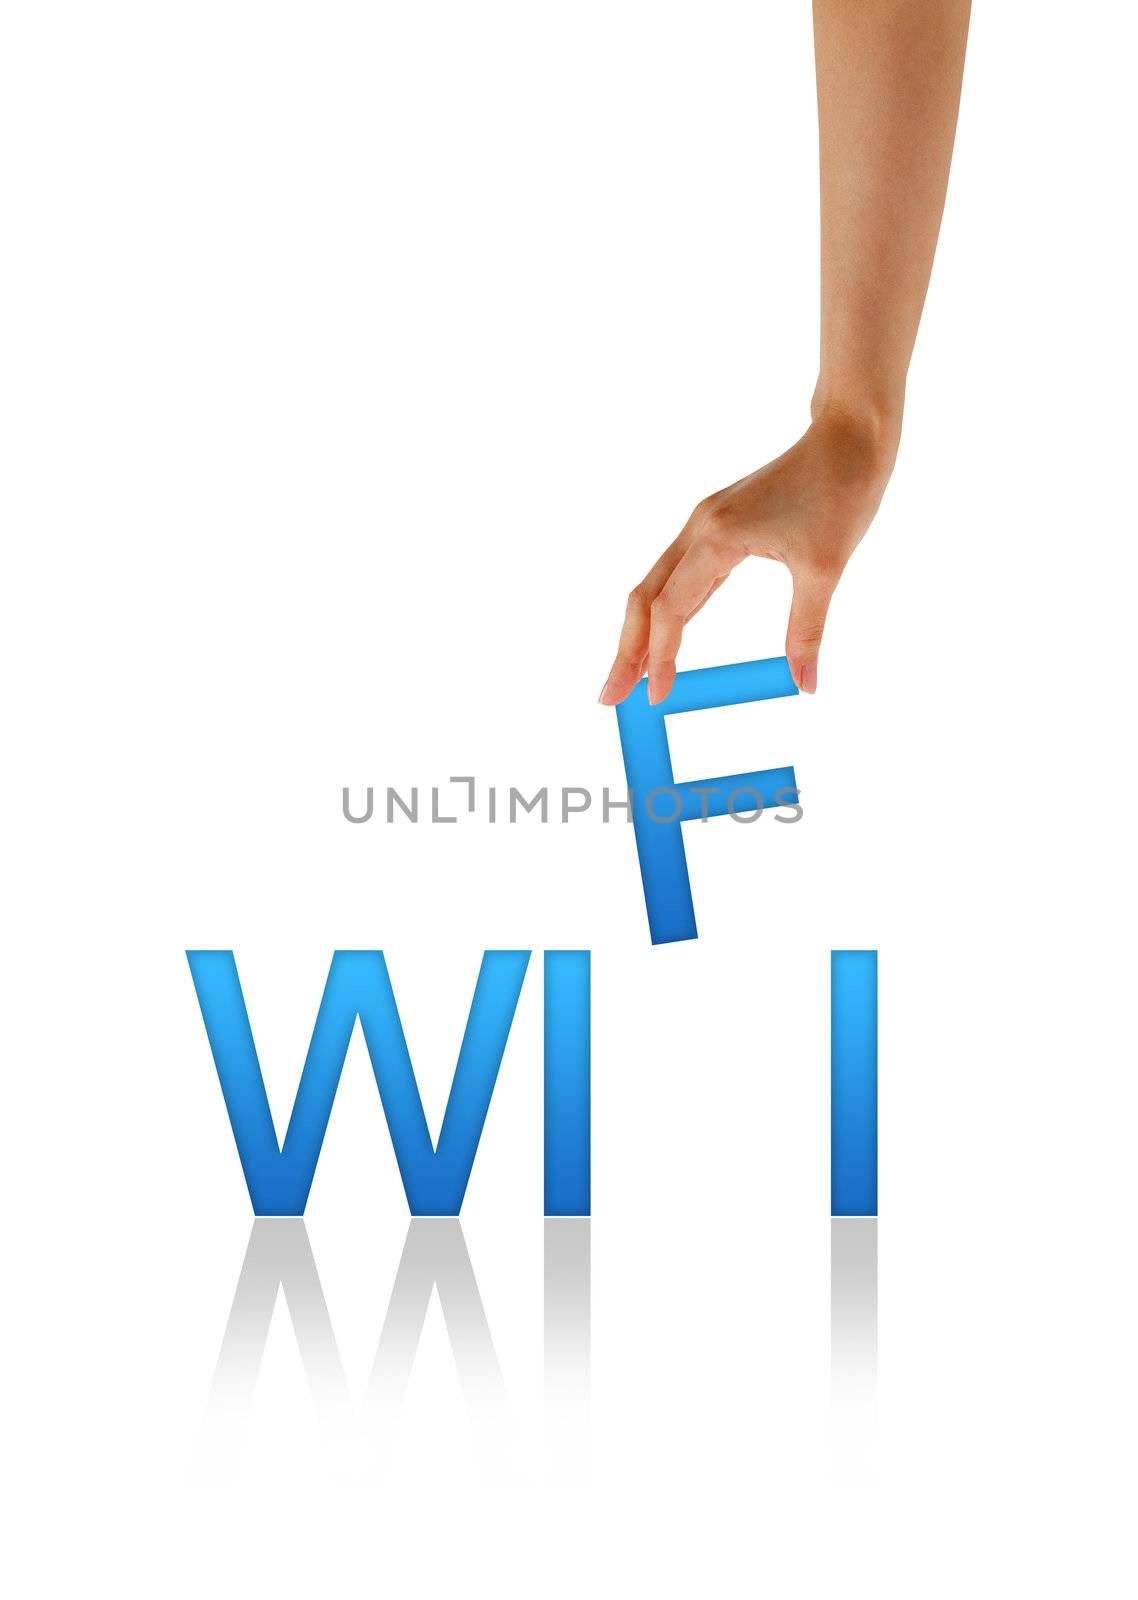 High resolution graphic of a hand holding the letter F from the word Wifi.